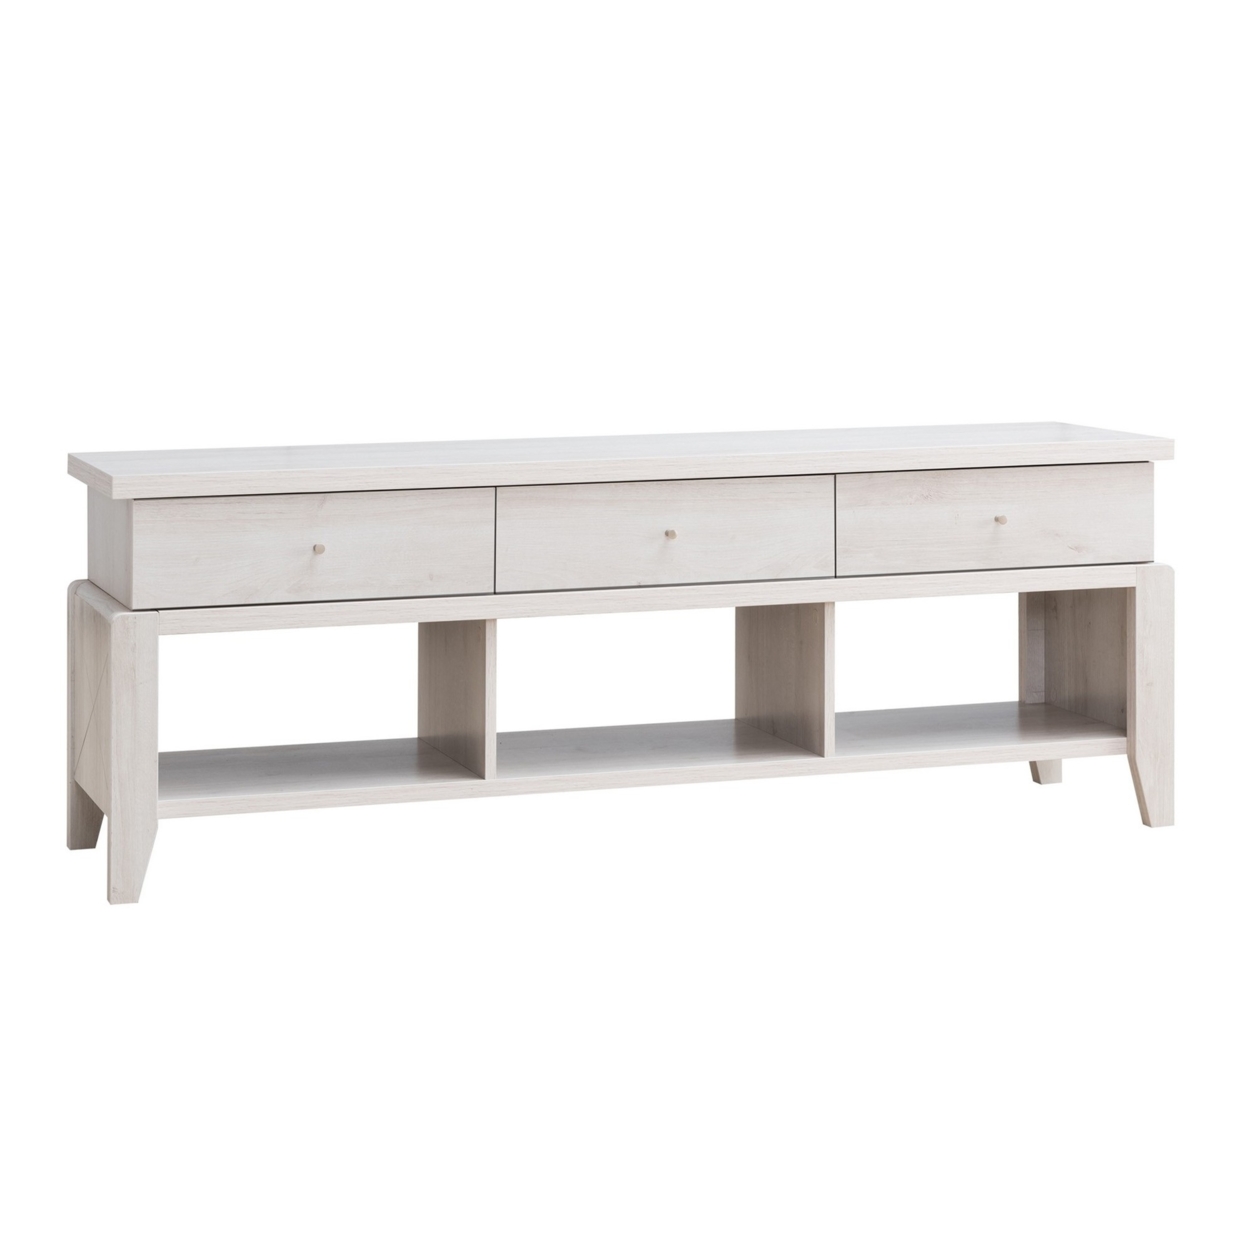 60 Inch Modern TV Media Entertainment Console, 3 Drawers, Wood, White, Oak